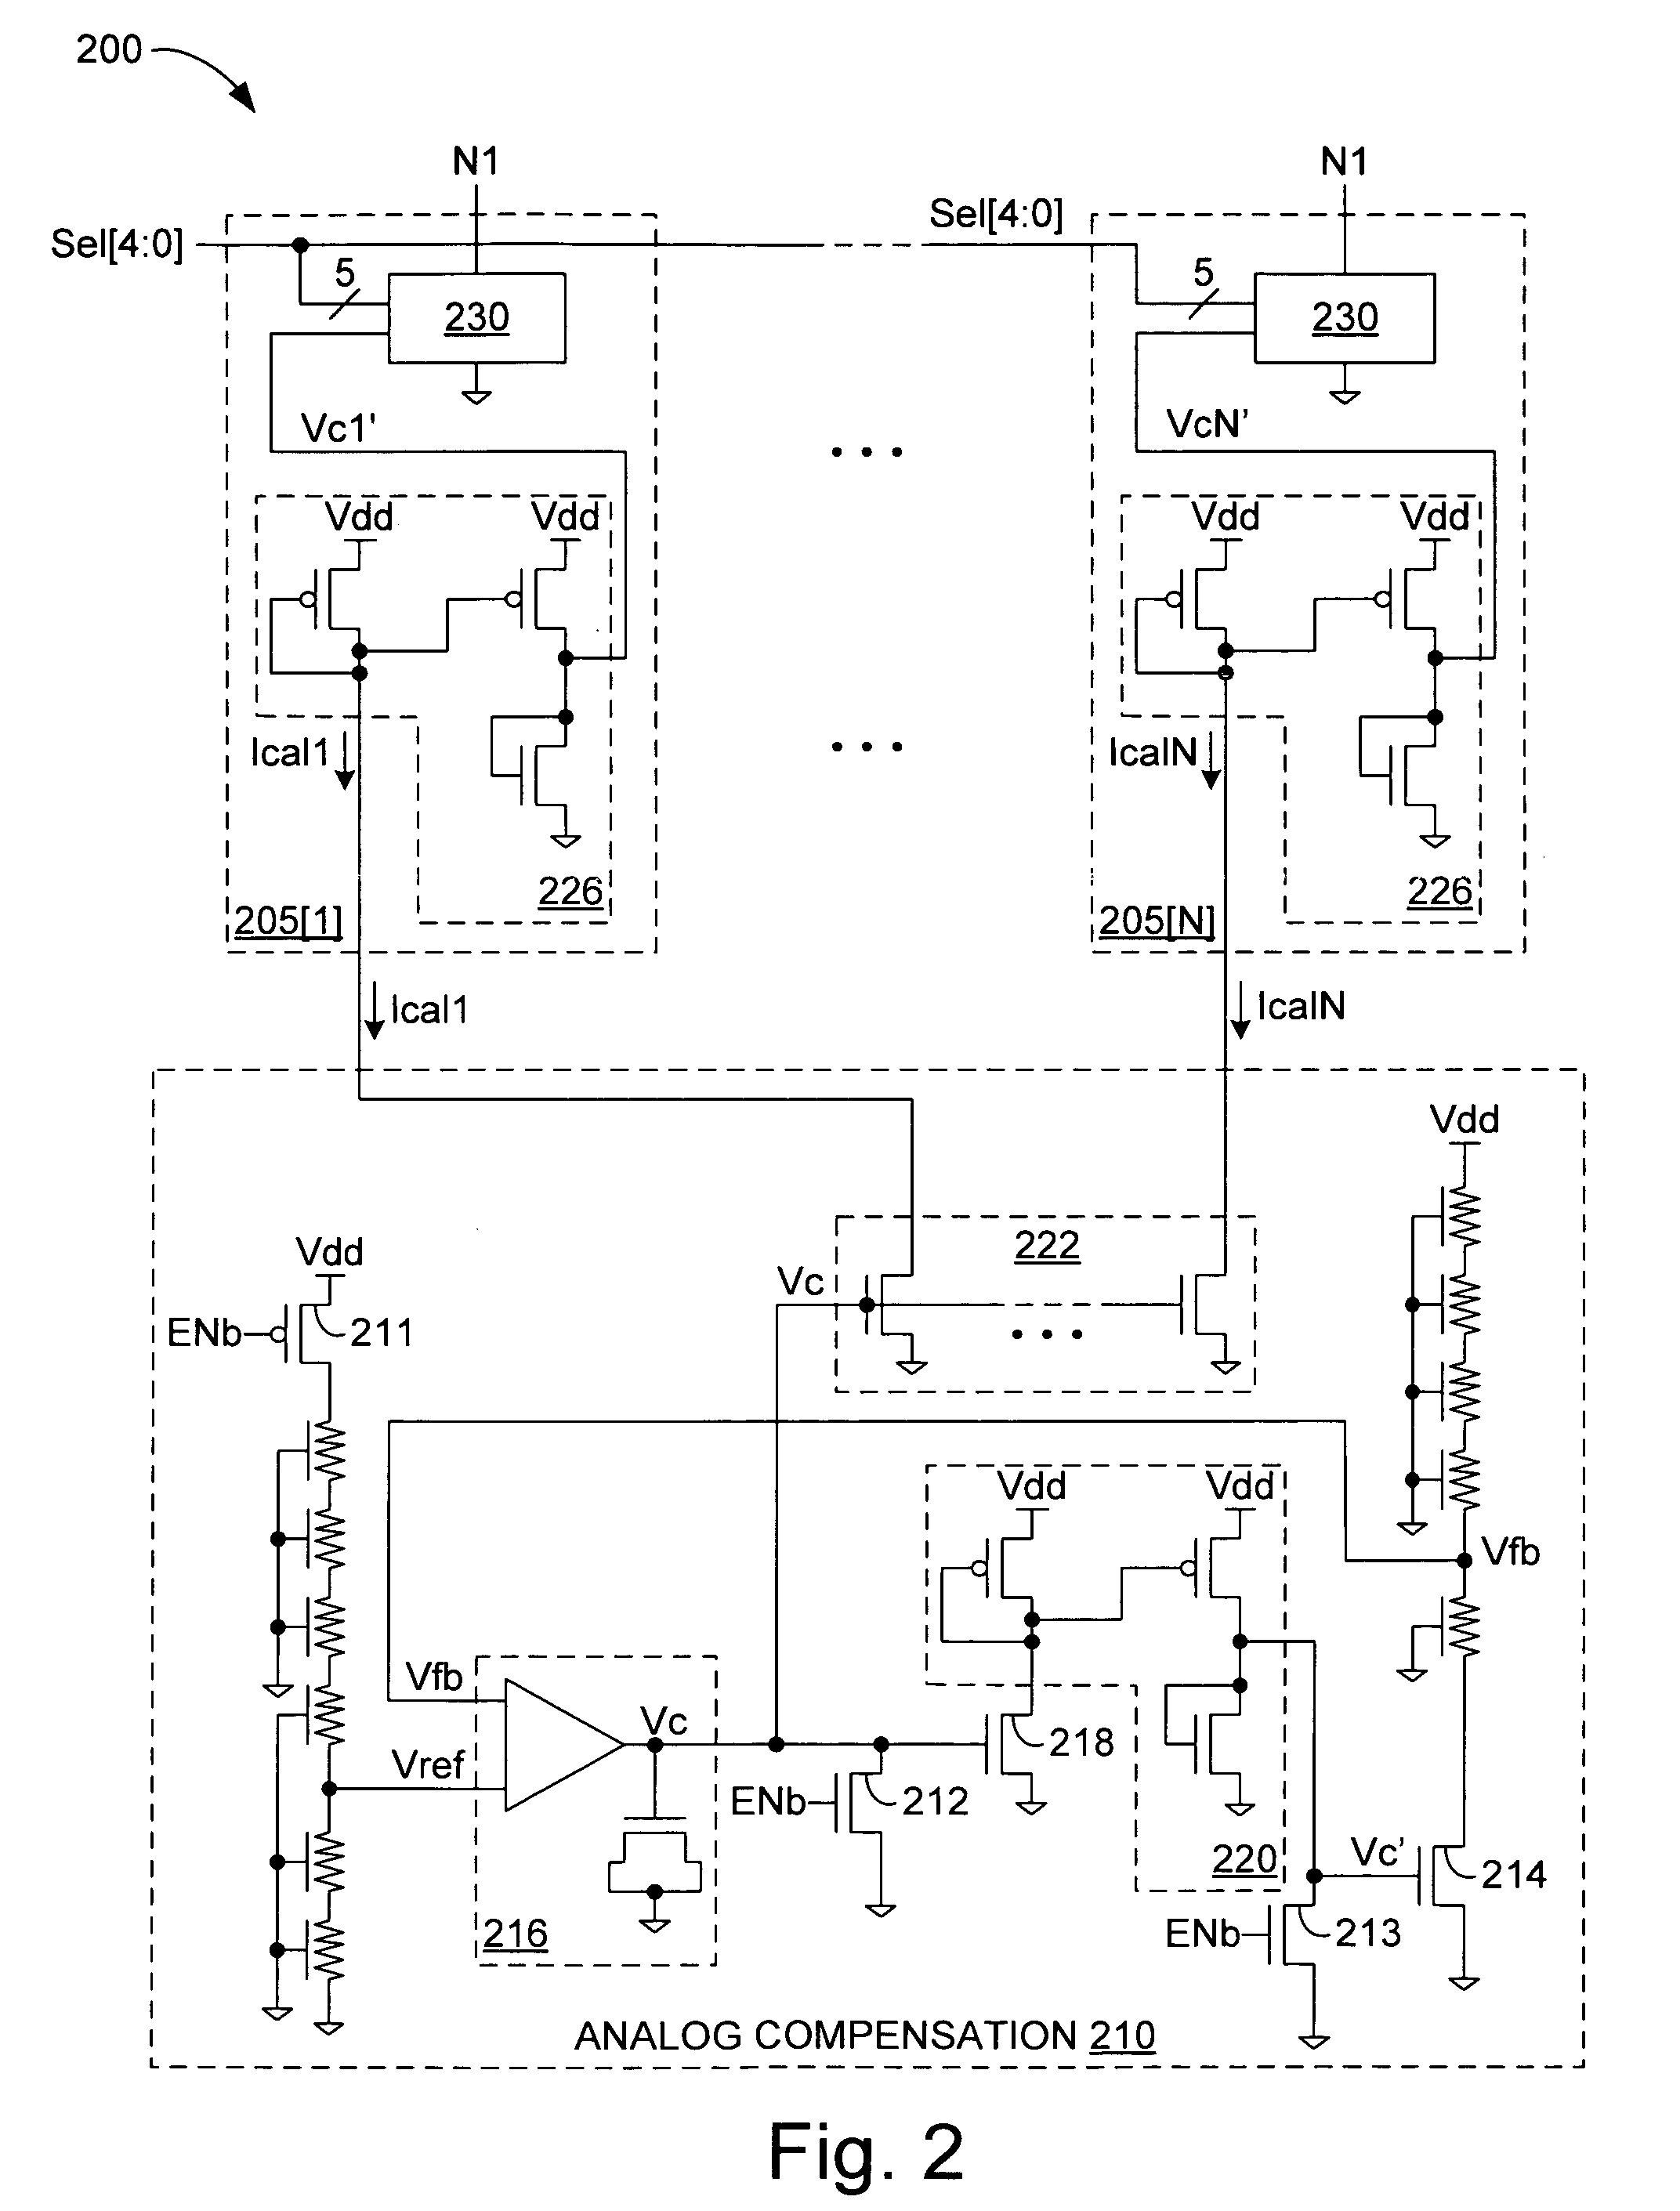 Systems and methods for controlling termination resistance values for a plurality of communication channels